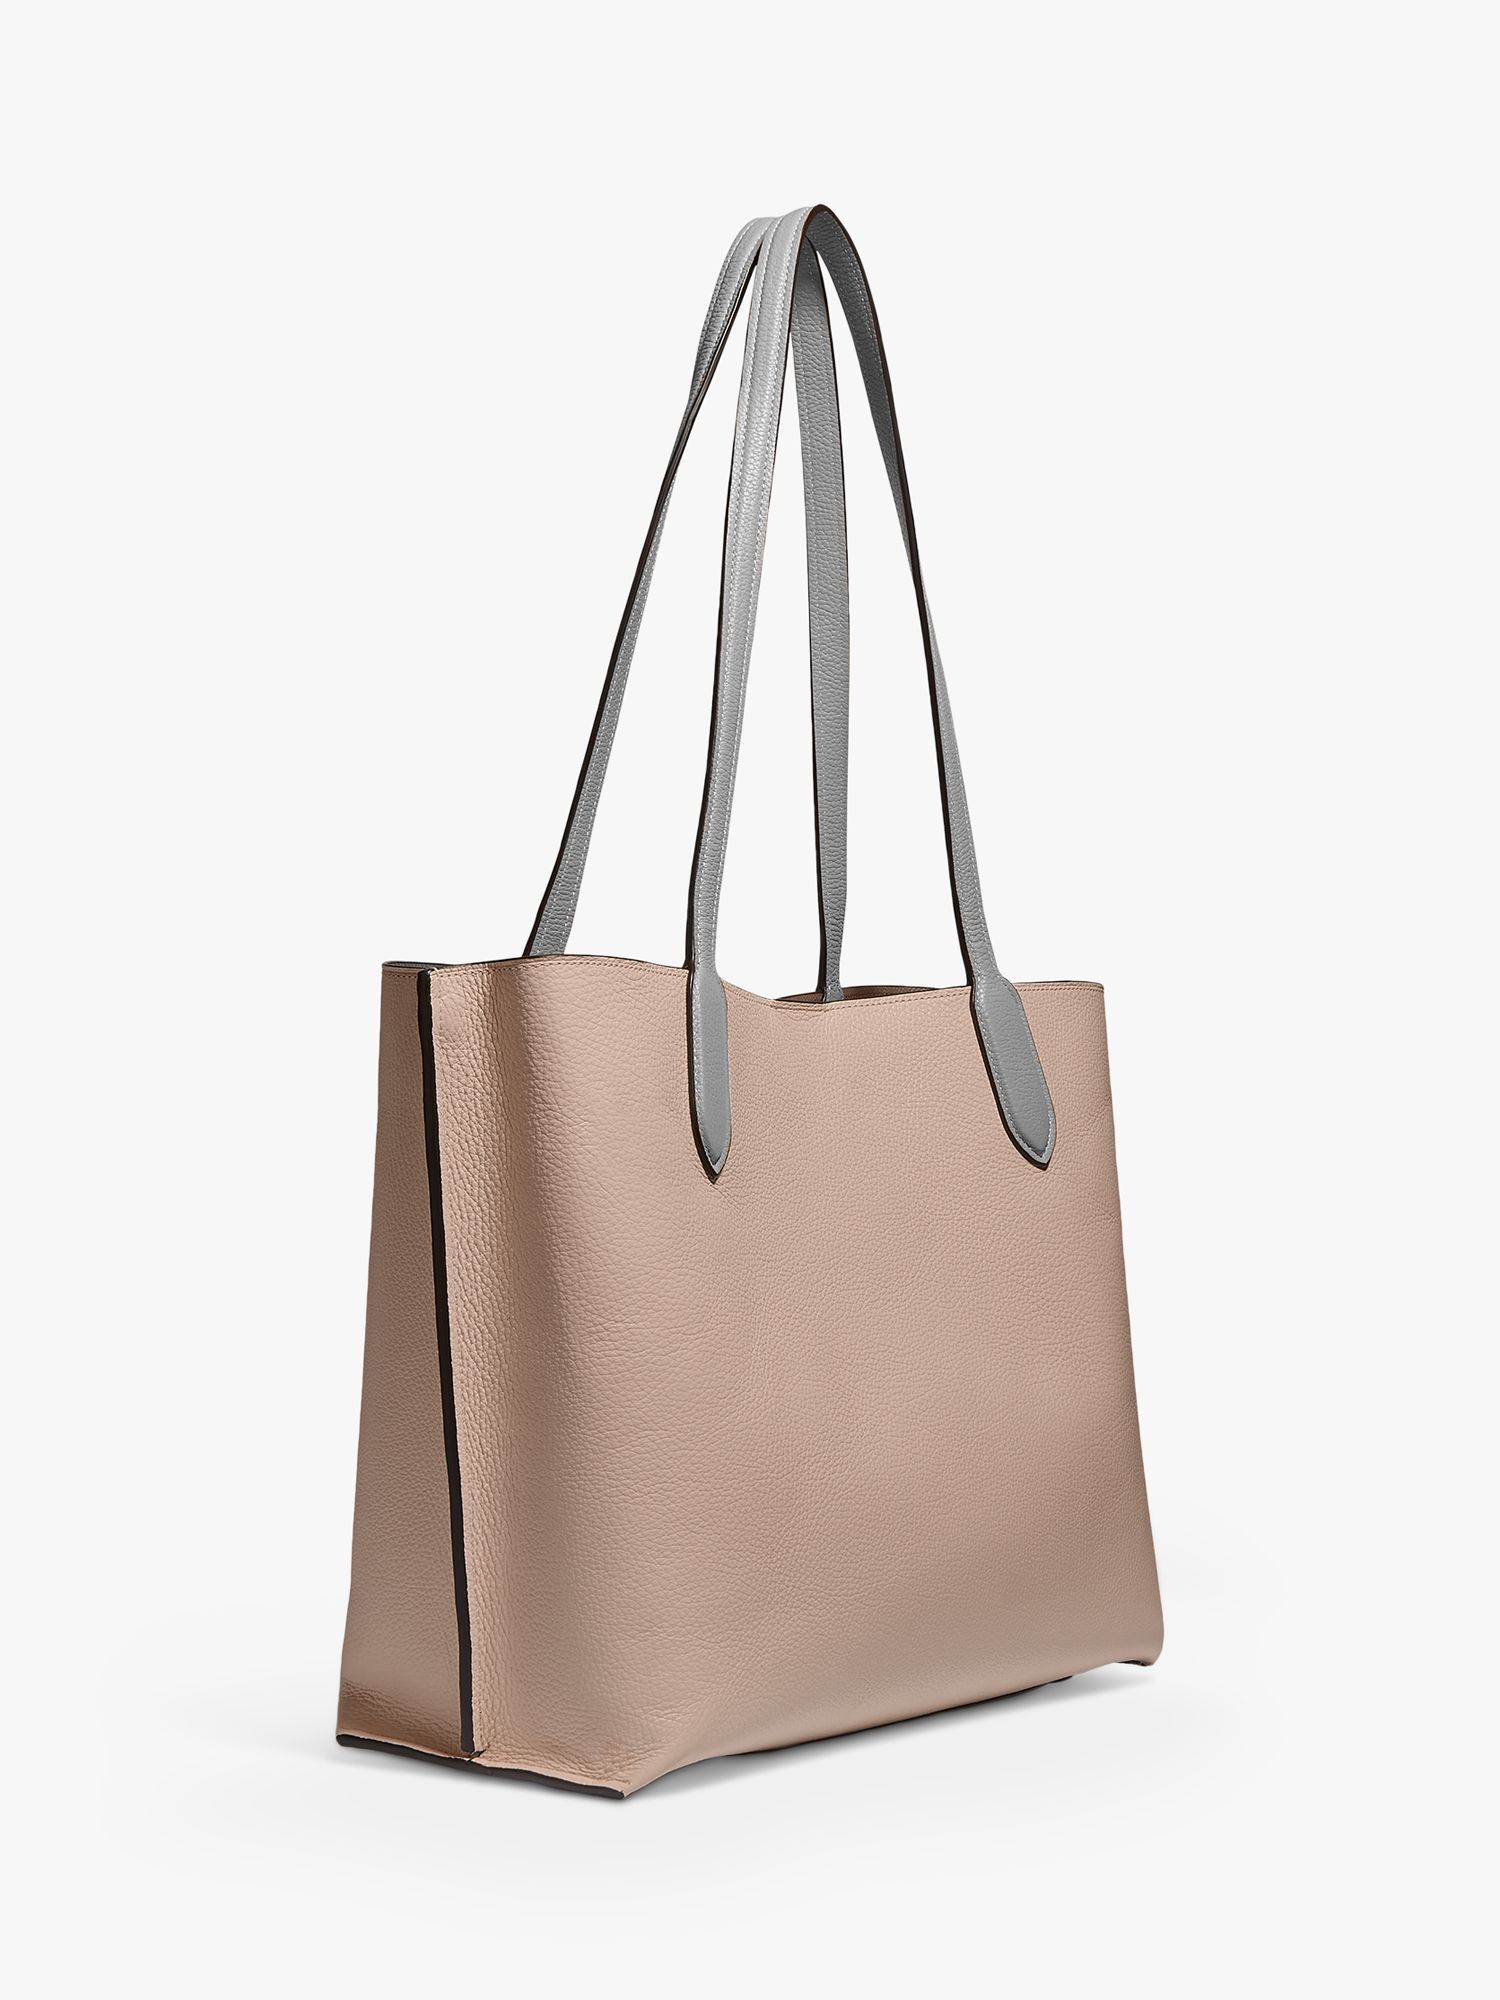 Coach Willow Leather Tote Bag, Taupe at John Lewis & Partners